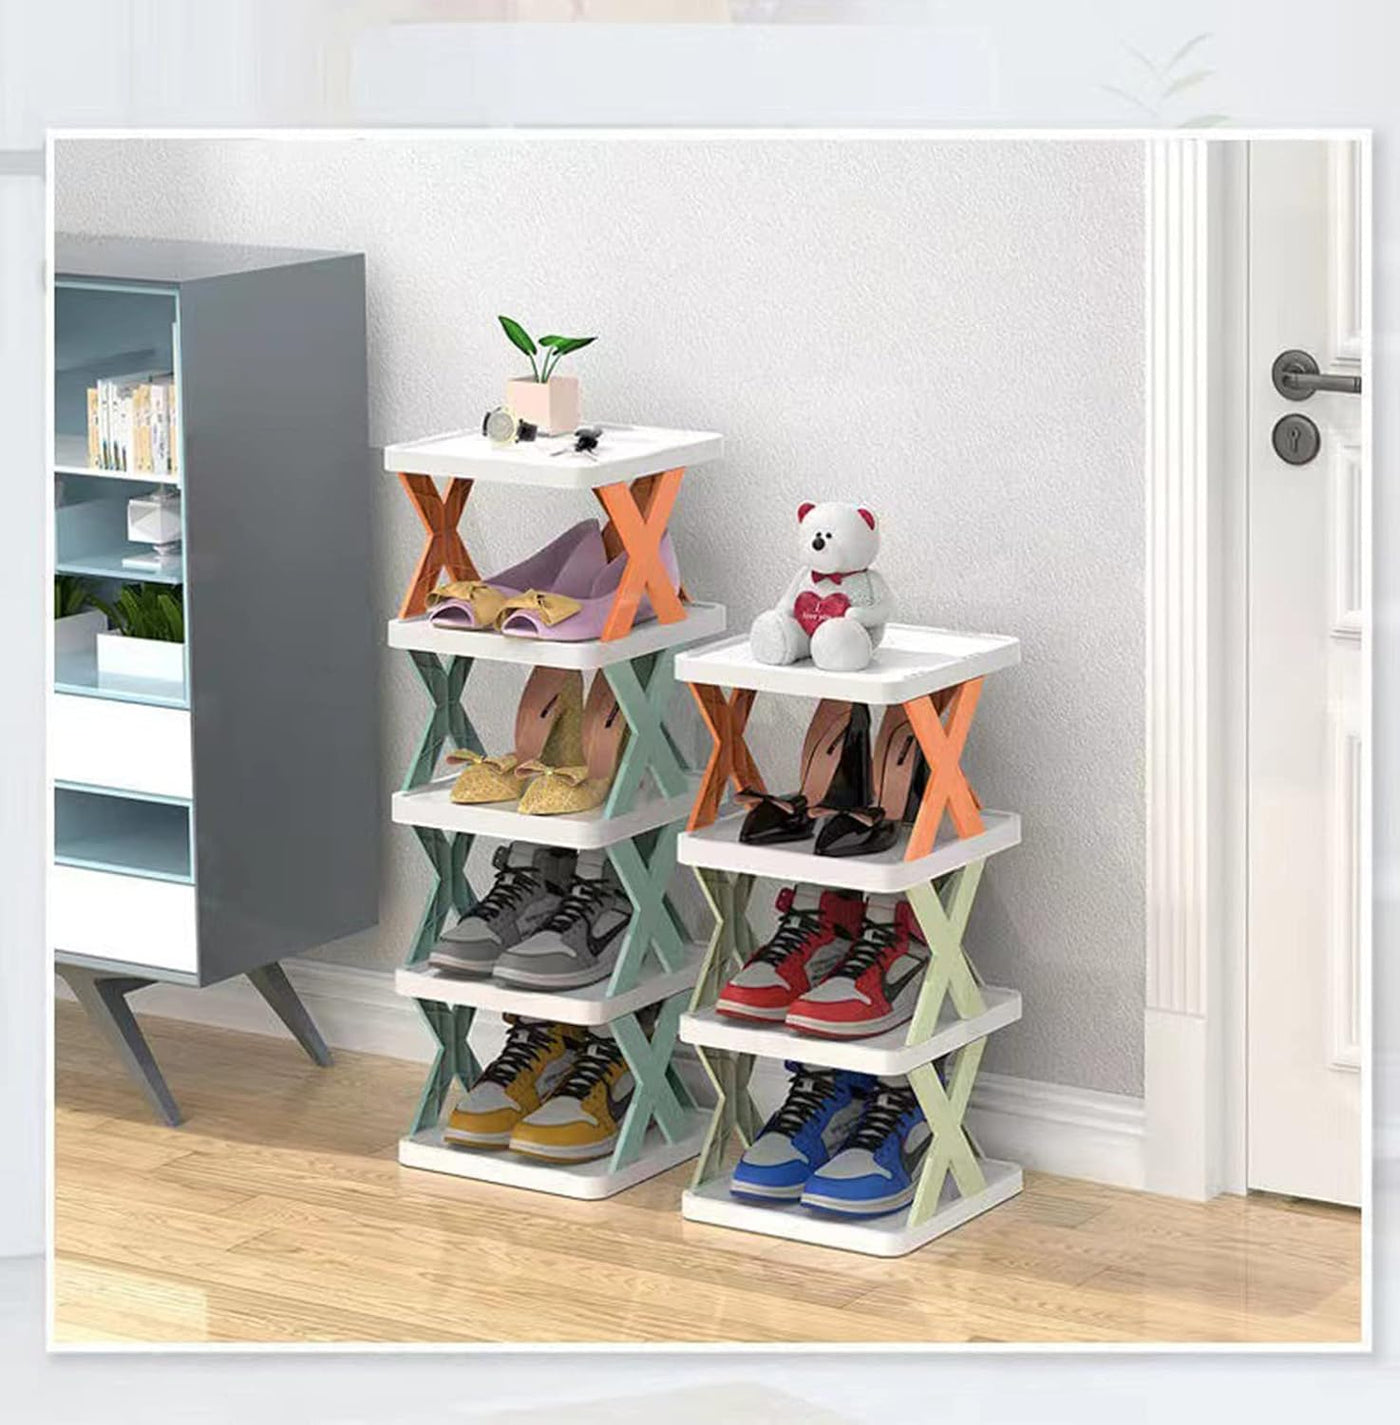 4 Tier Shoes Storage Cabinet for Saving Space-Green